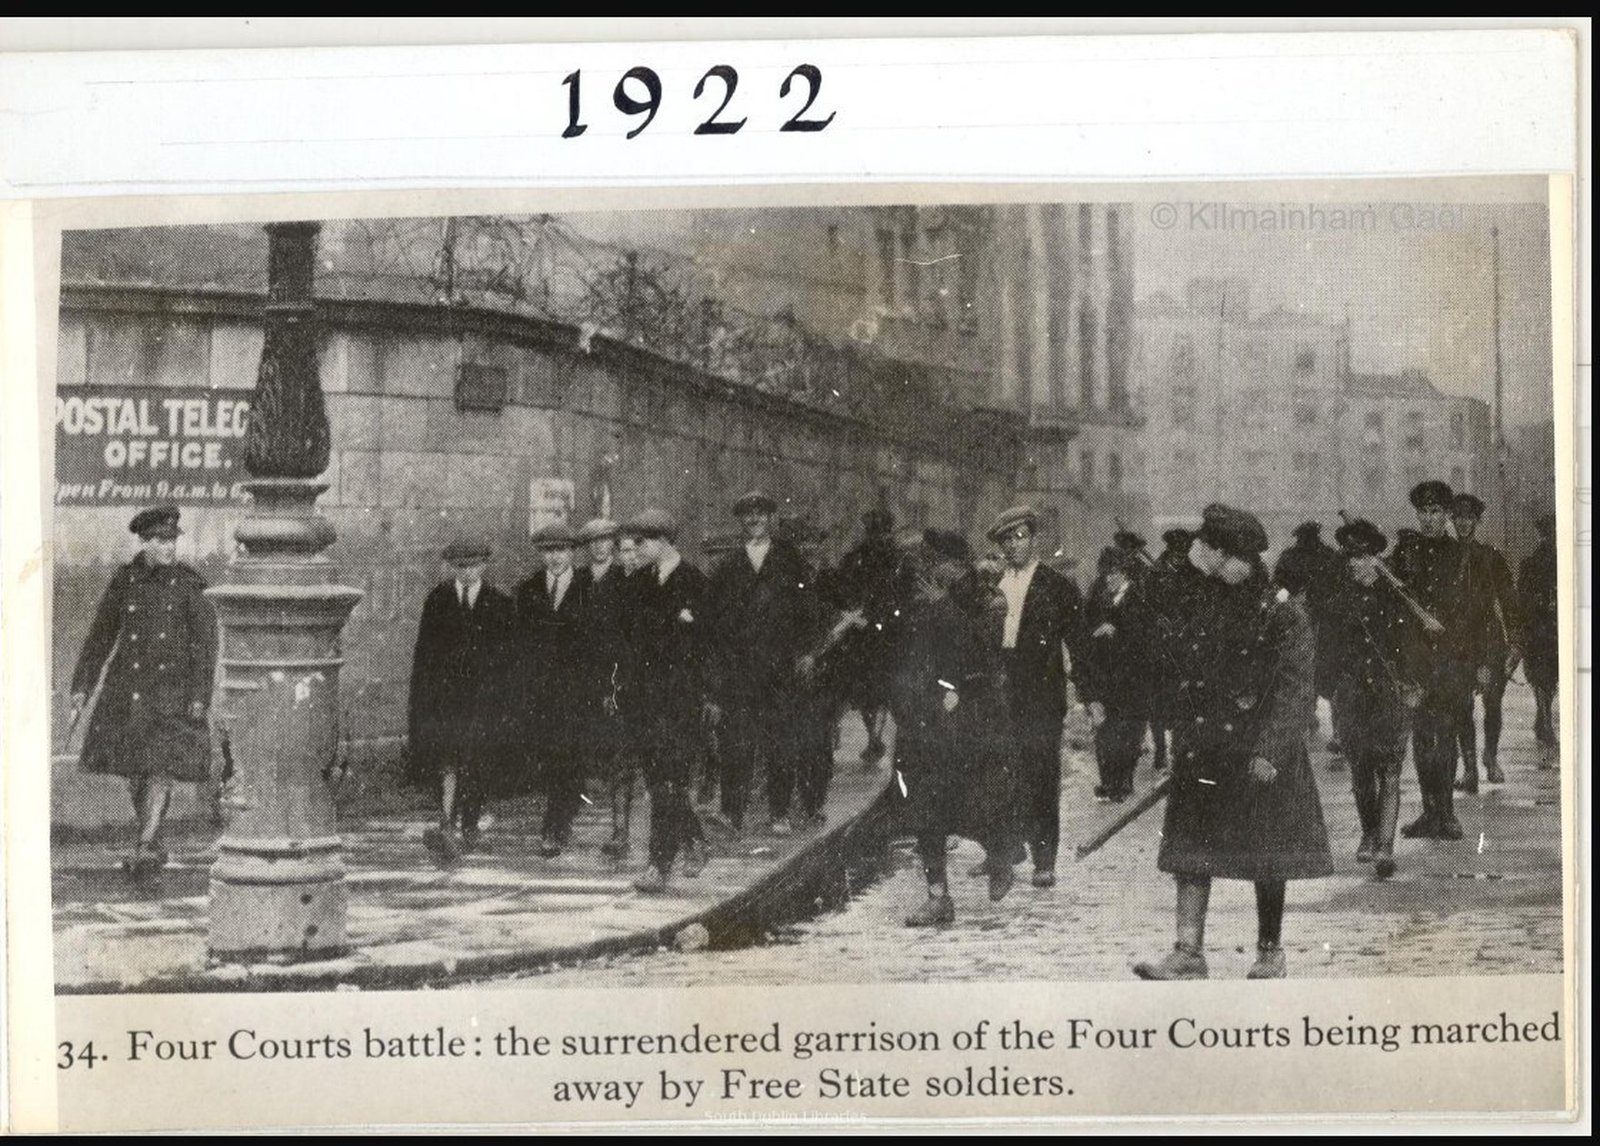 Image - The surrendered garrison is marched away into captivity (Credit: Kilmainham Gaol Archive)